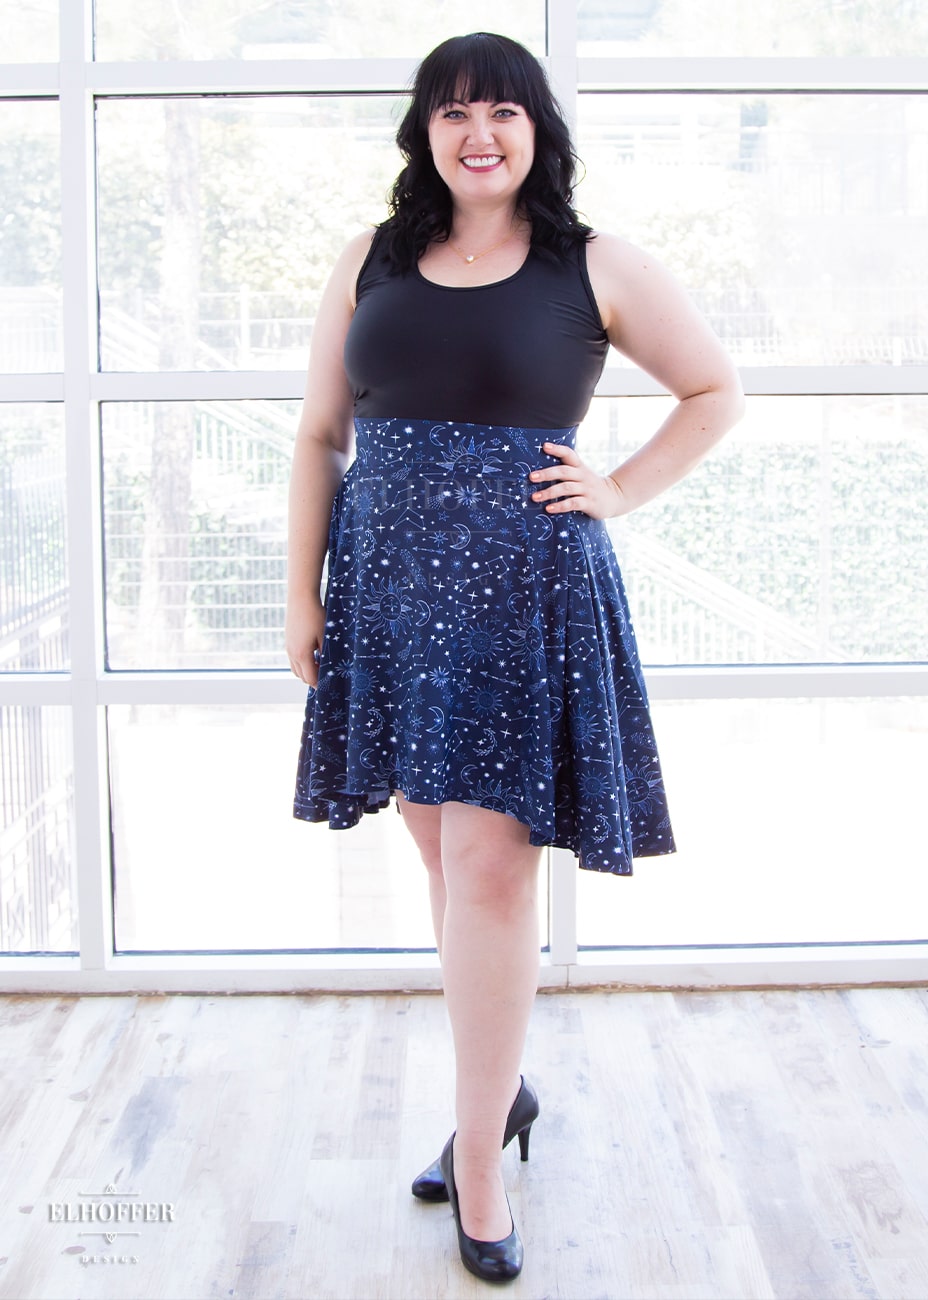 Bernadette, a fair skinned size large model with short black hair and bangs,  is wearing a high low skirt that hits the back of her knees with a two inch elastic covered waistband. The skirt is our star crossed lovers print. The Star-Crossed Lovers print is a celestial inspired pattern featuring a navy base and white stars, constellations, sunds, moons, and other small details scattered across the repeated art.